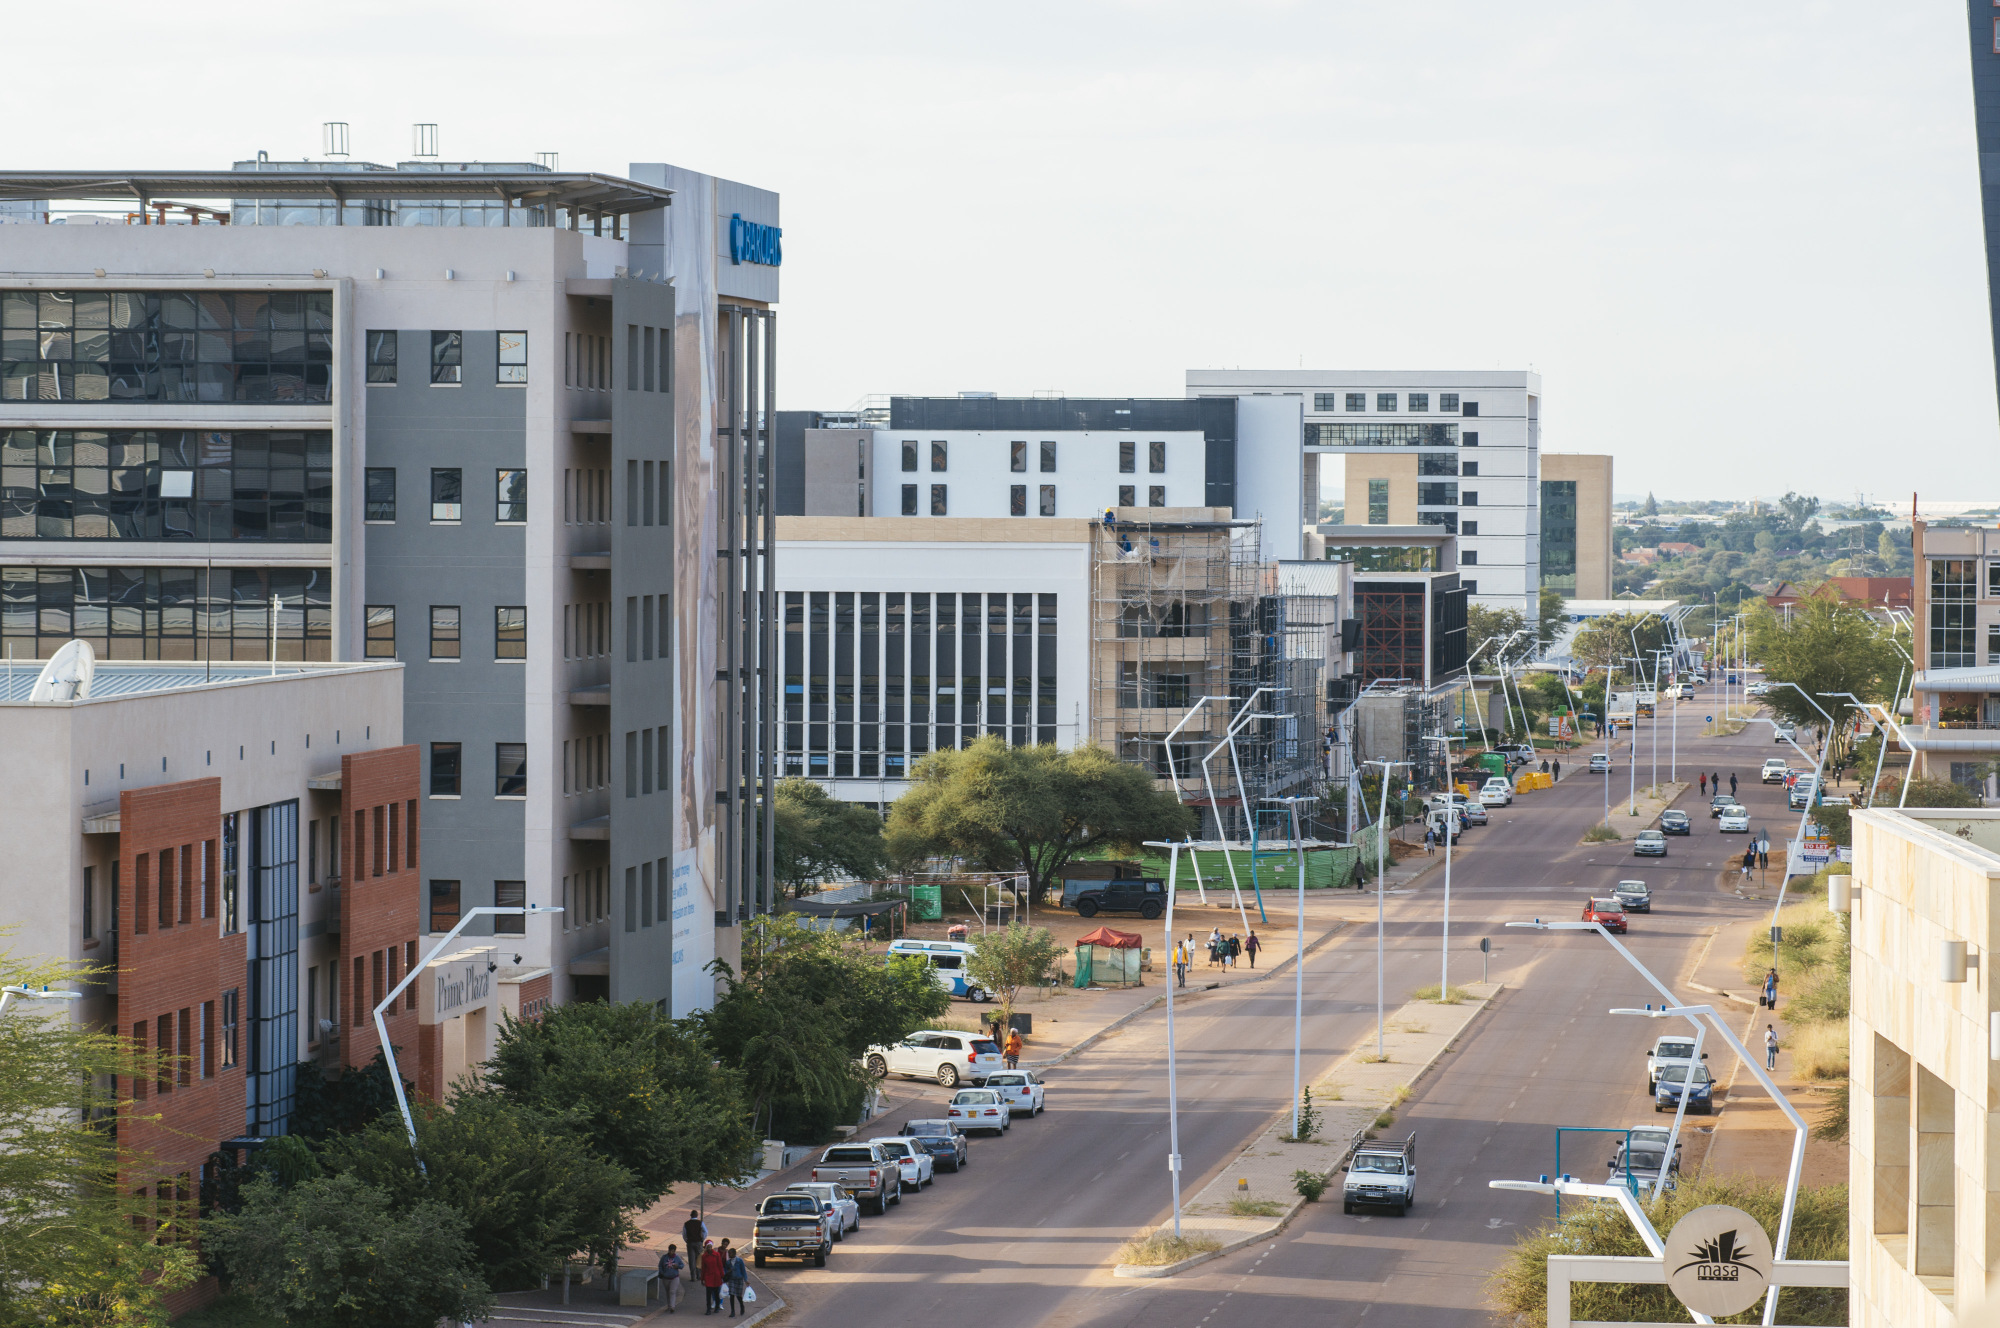 Commercial buildings, including the Barclays Bank of Botswana Ltd. office, second right, stand in the central business district of Gaborone, Botswana.